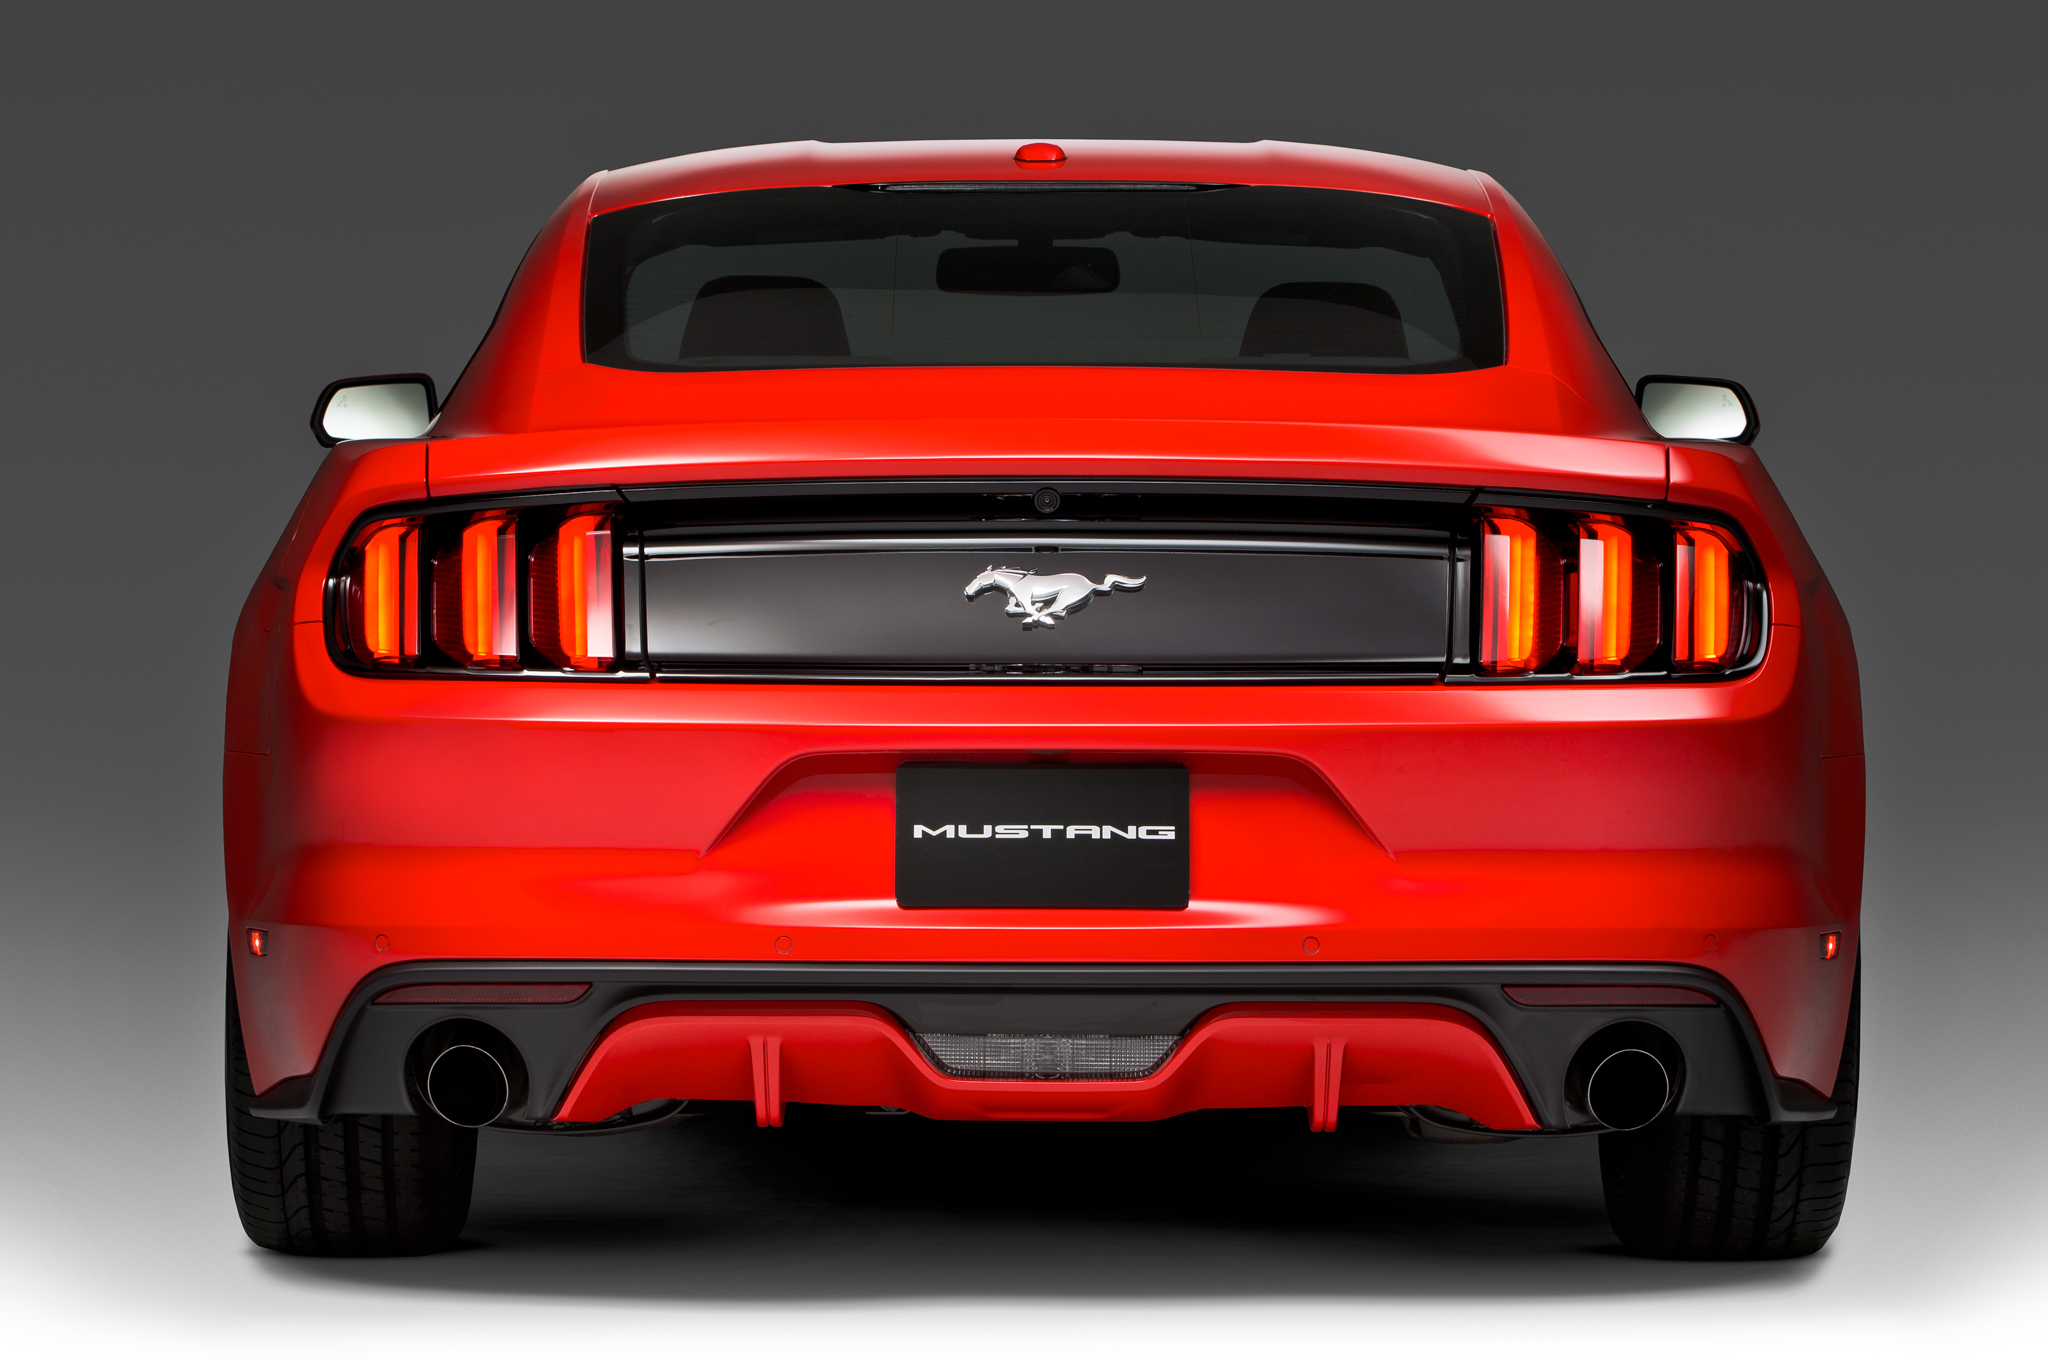 Ford Mustang at the rear end